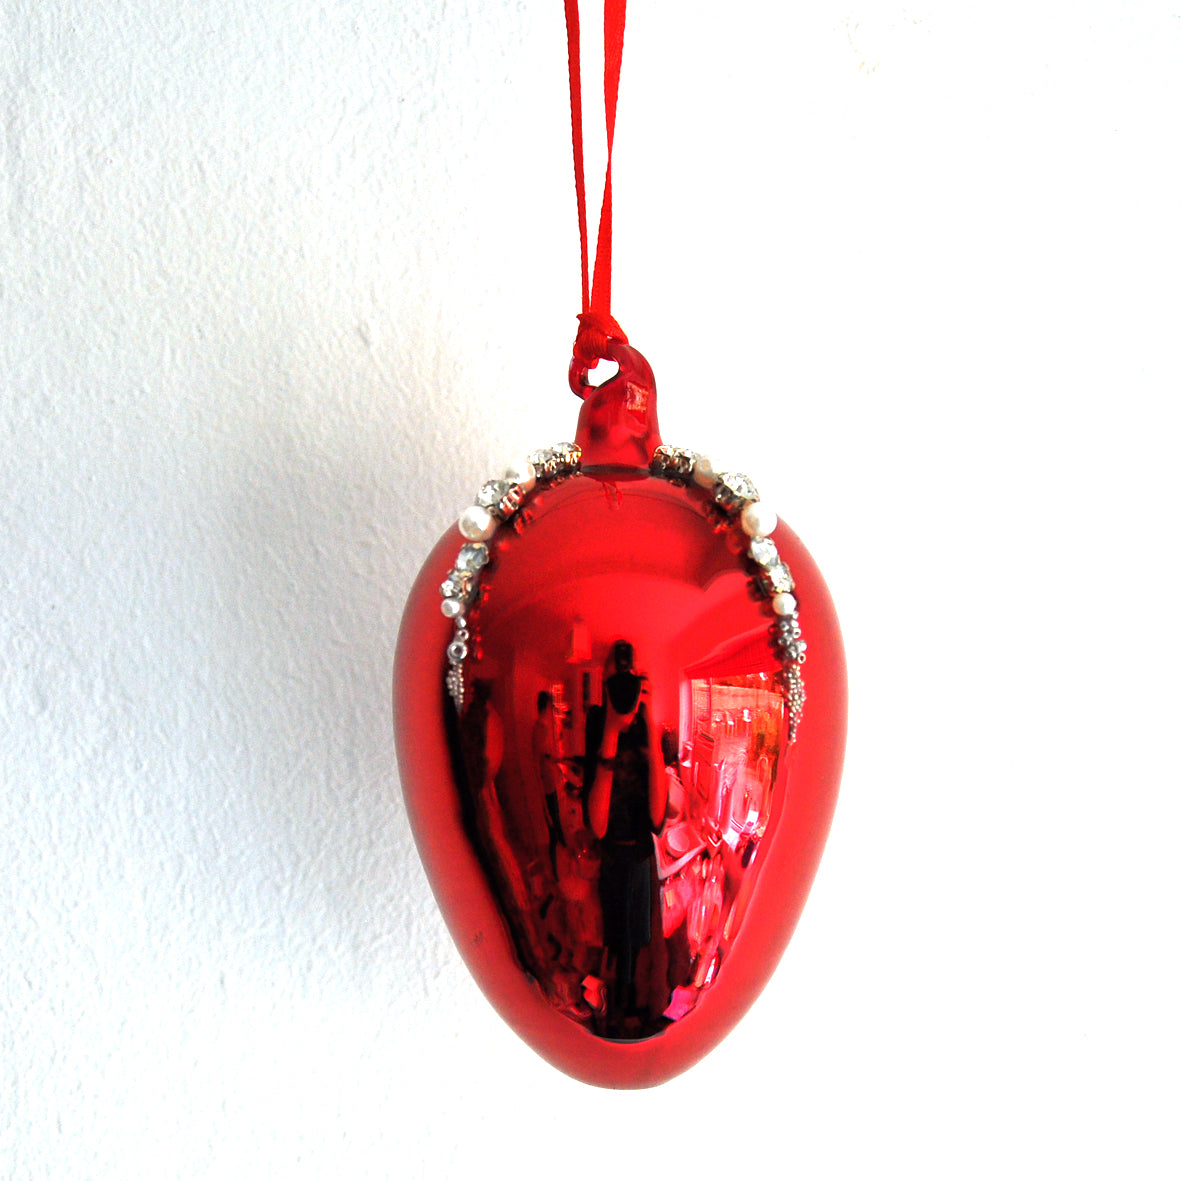 This red mirror egg shape Christmas ornament is made from glass and decorated with beads, pearls and diamonte.